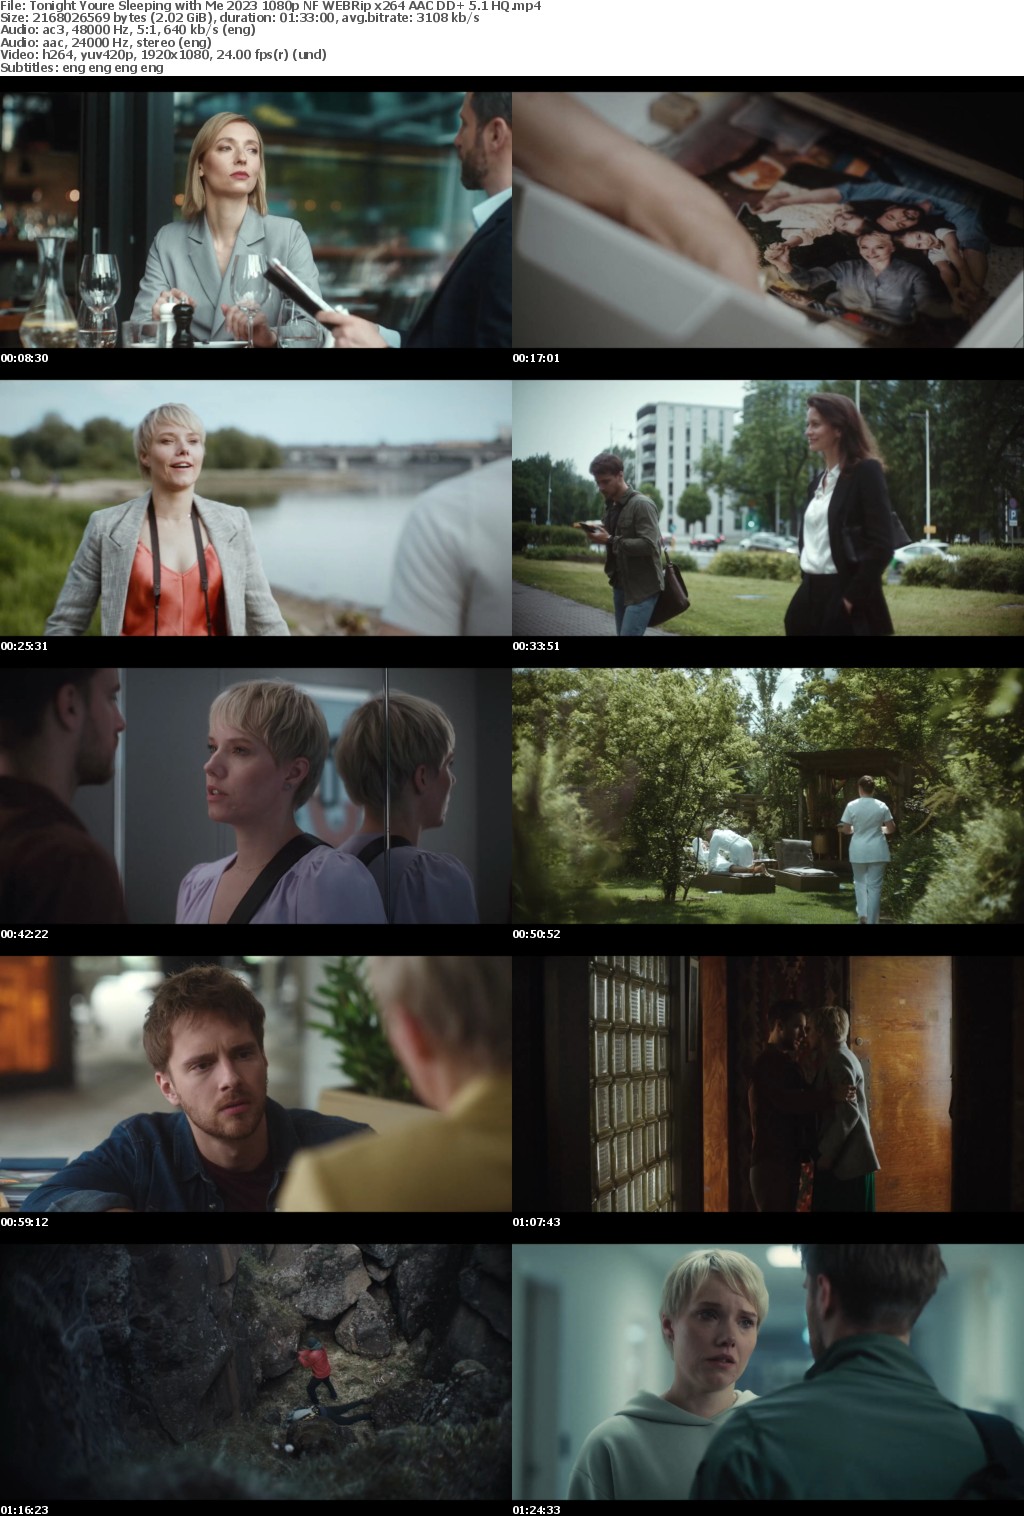 Tonight Youre Sleeping with Me 2023 1080p NF WEBRip x264 AAC DD+ 5 1 HQ